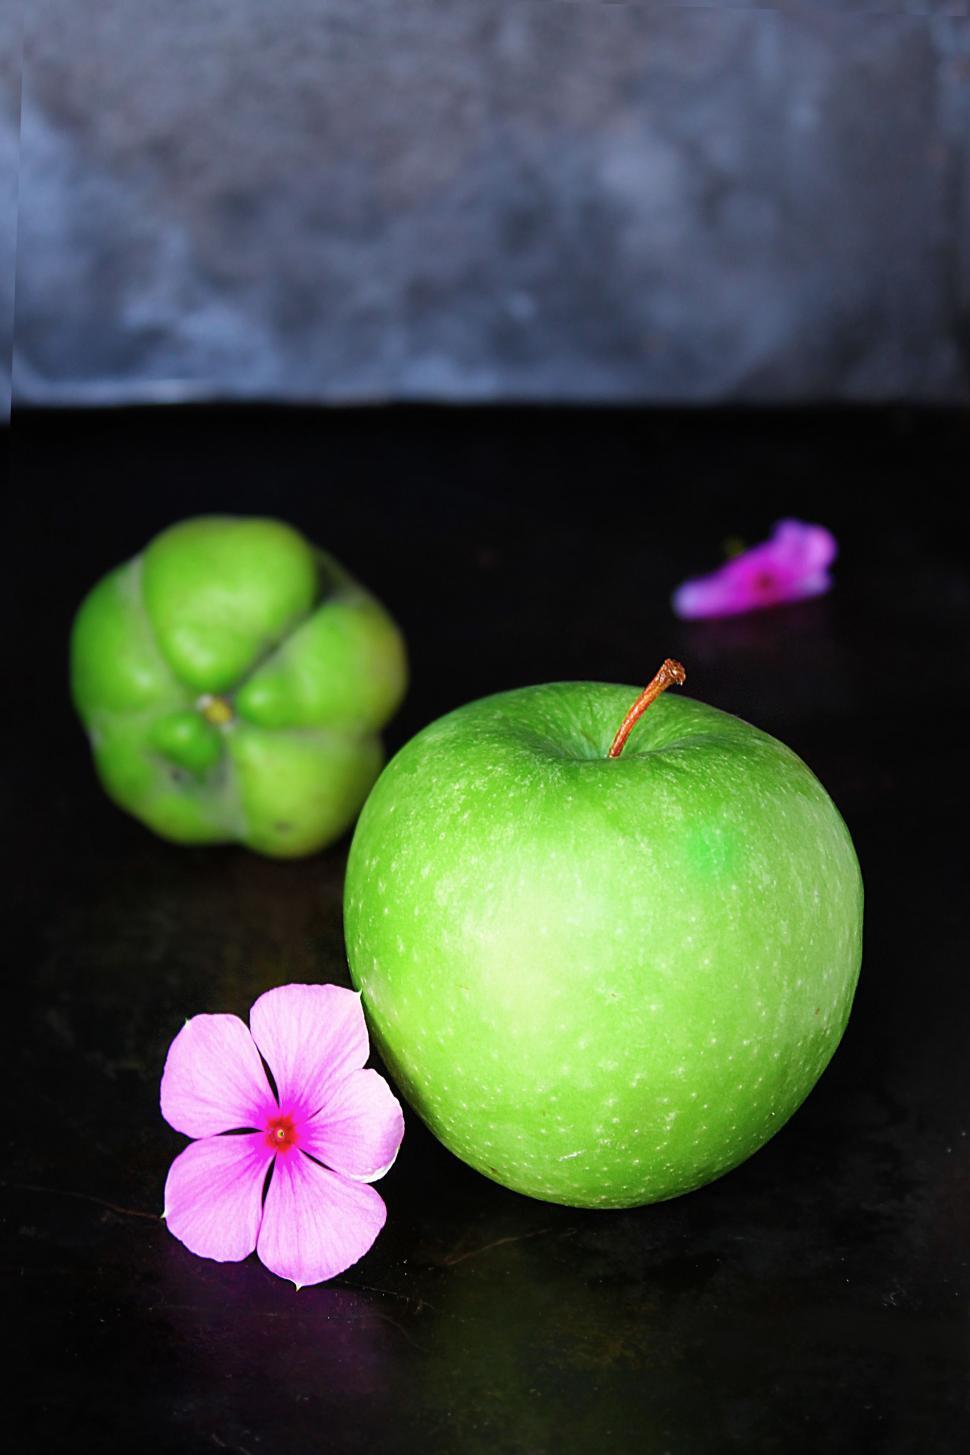 Free Image of Apple and Flower  